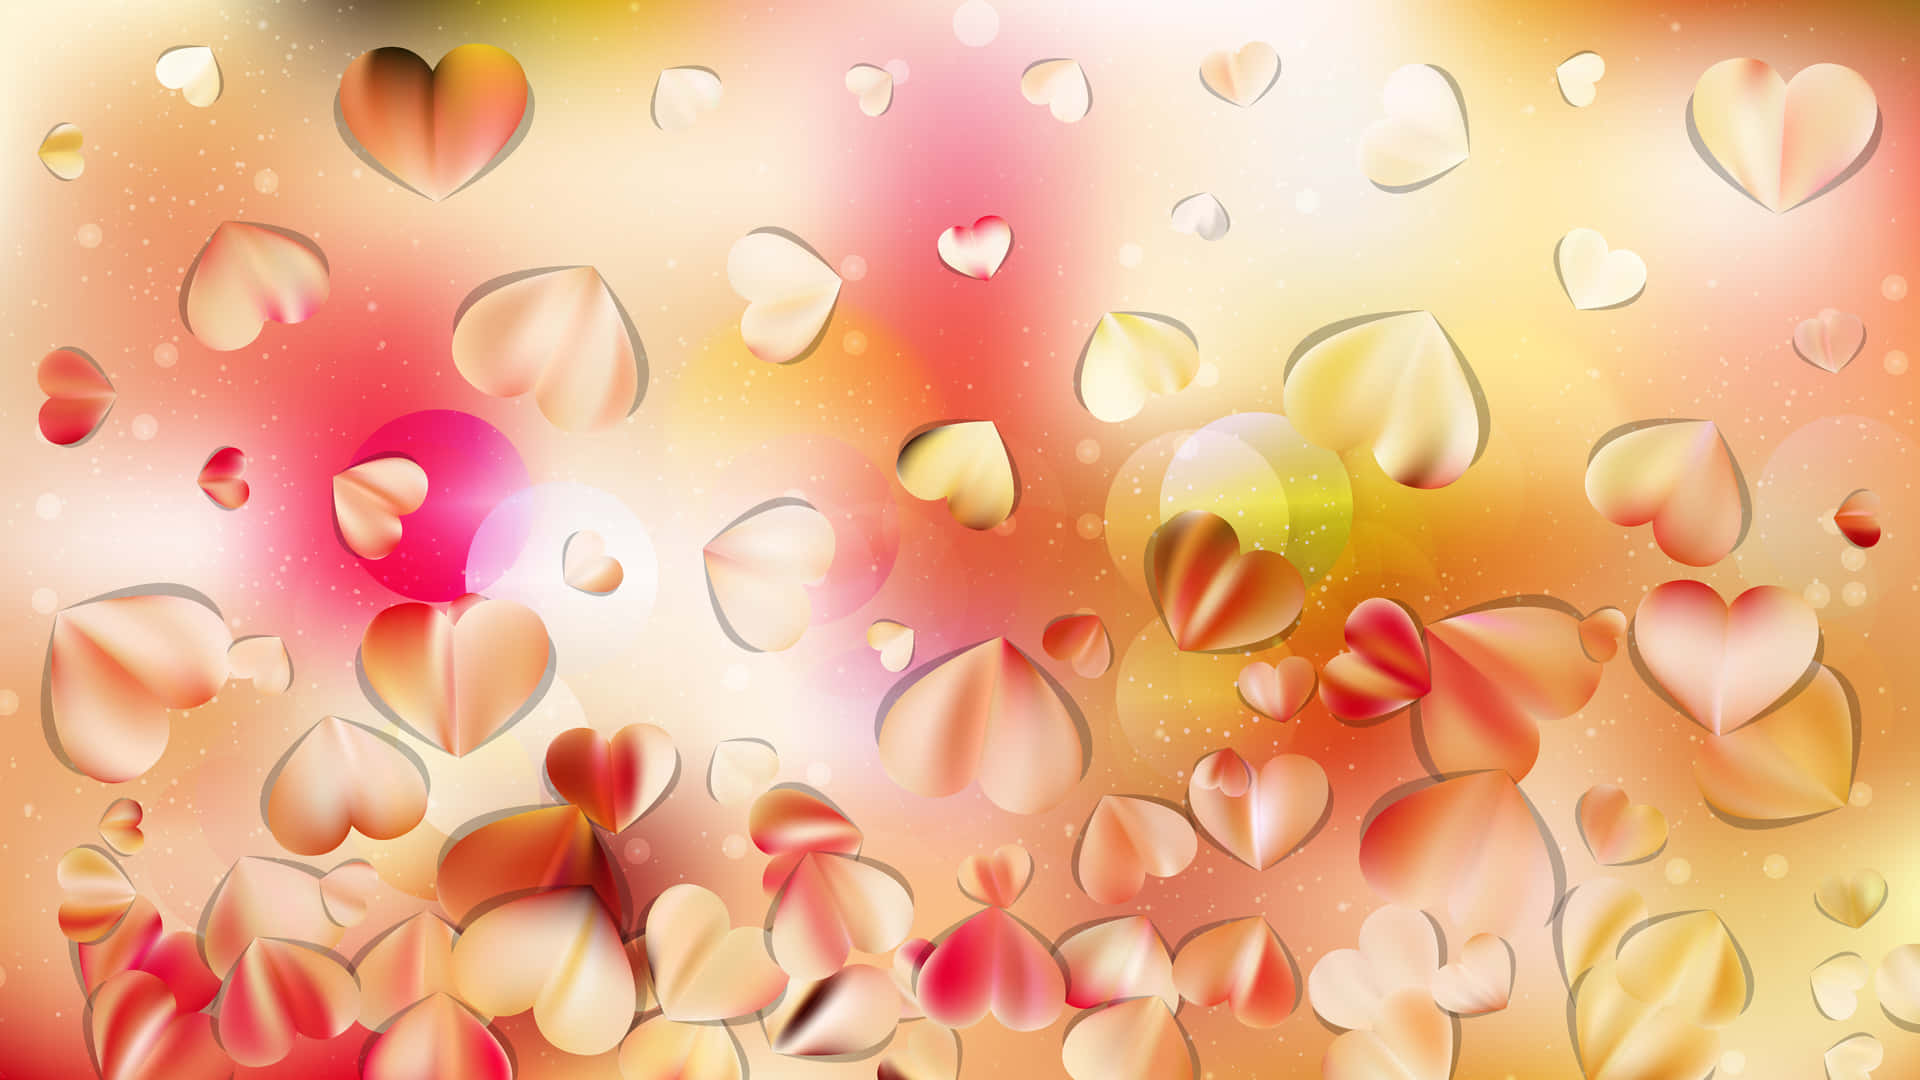 A Colorful Background With Hearts And Rain Drops Wallpaper